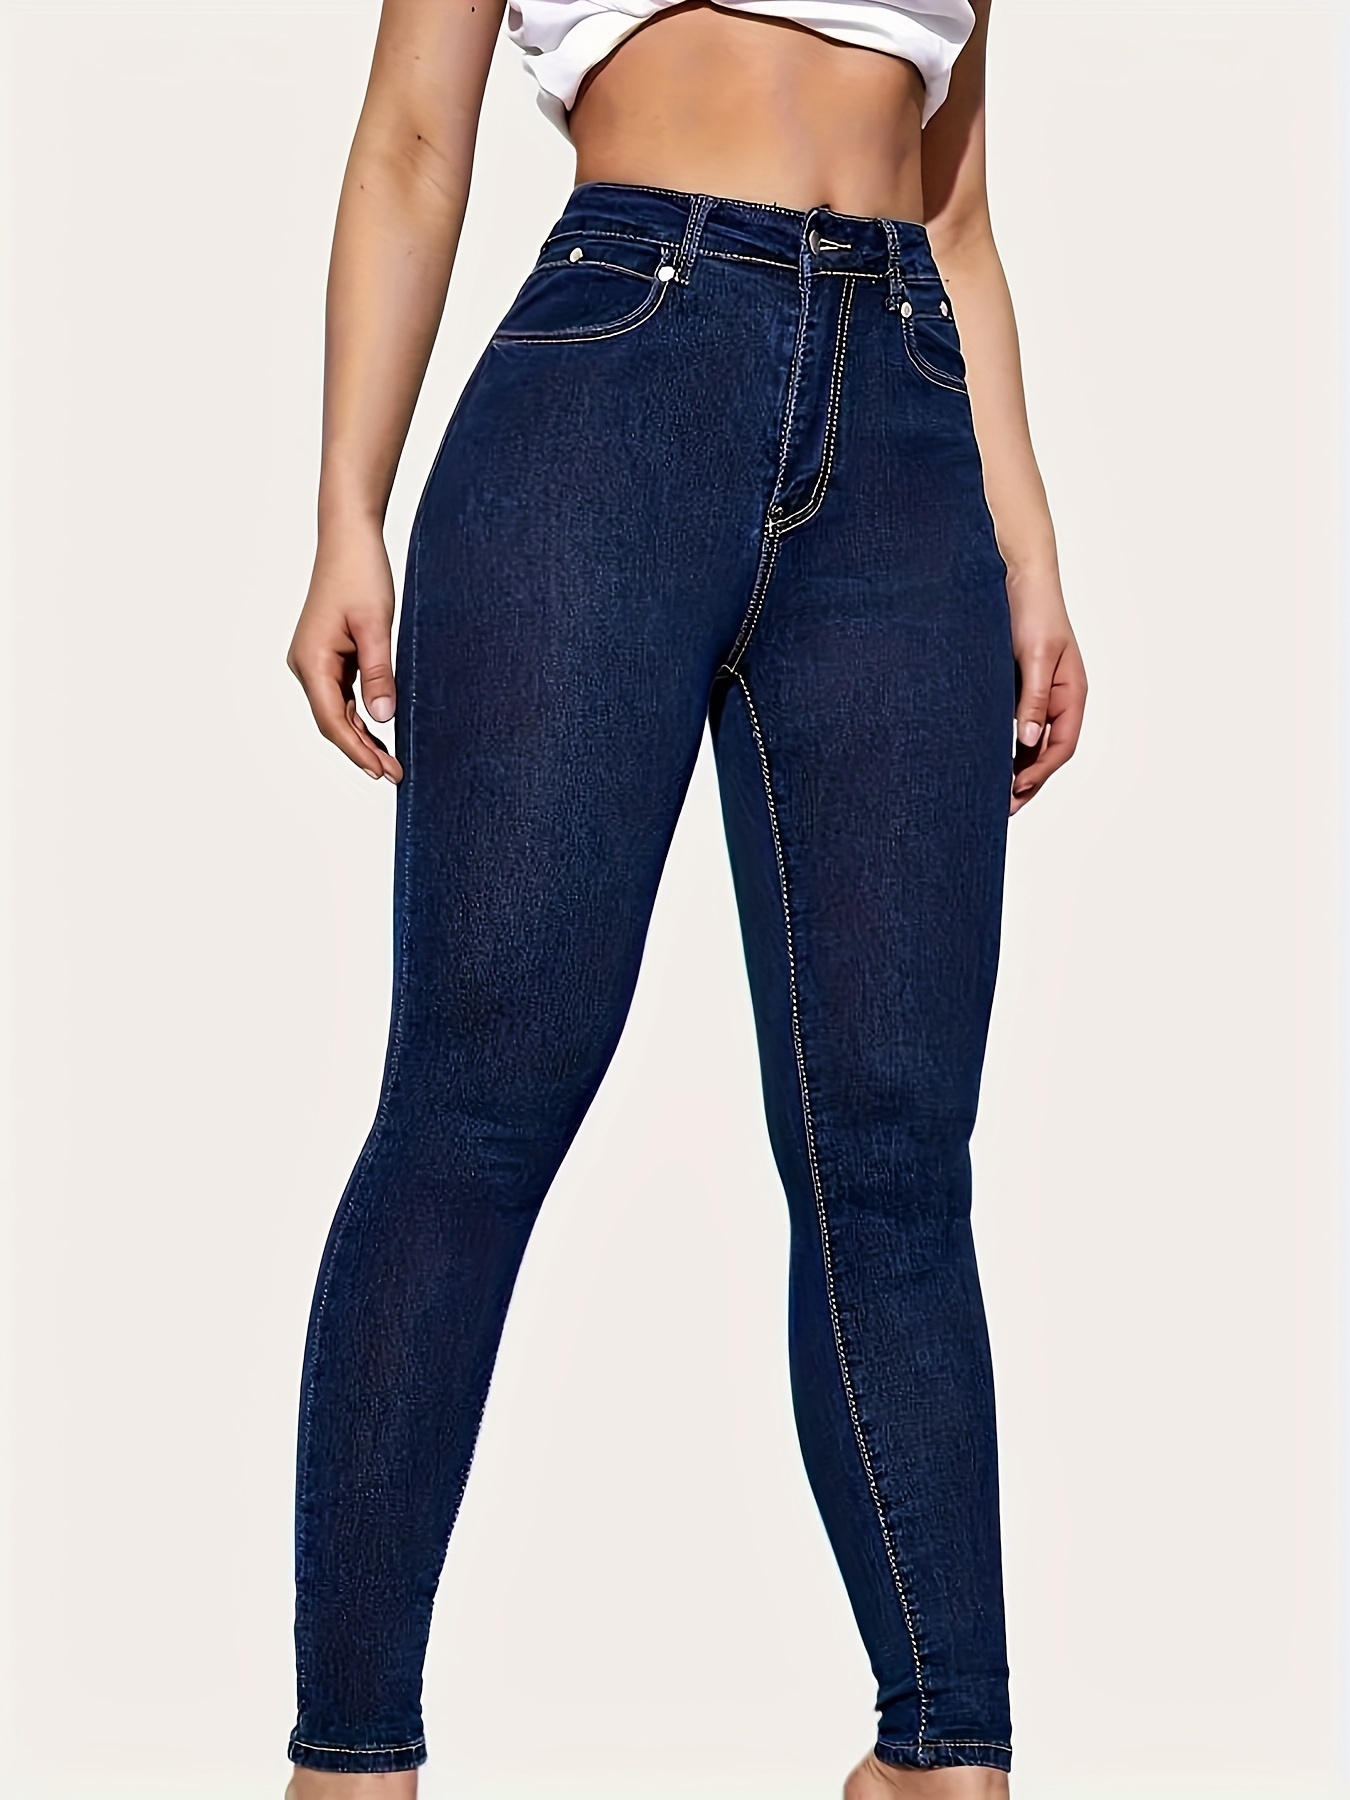 Denim Jeggings for Women with Pockets Comfortable Stretch Jeans